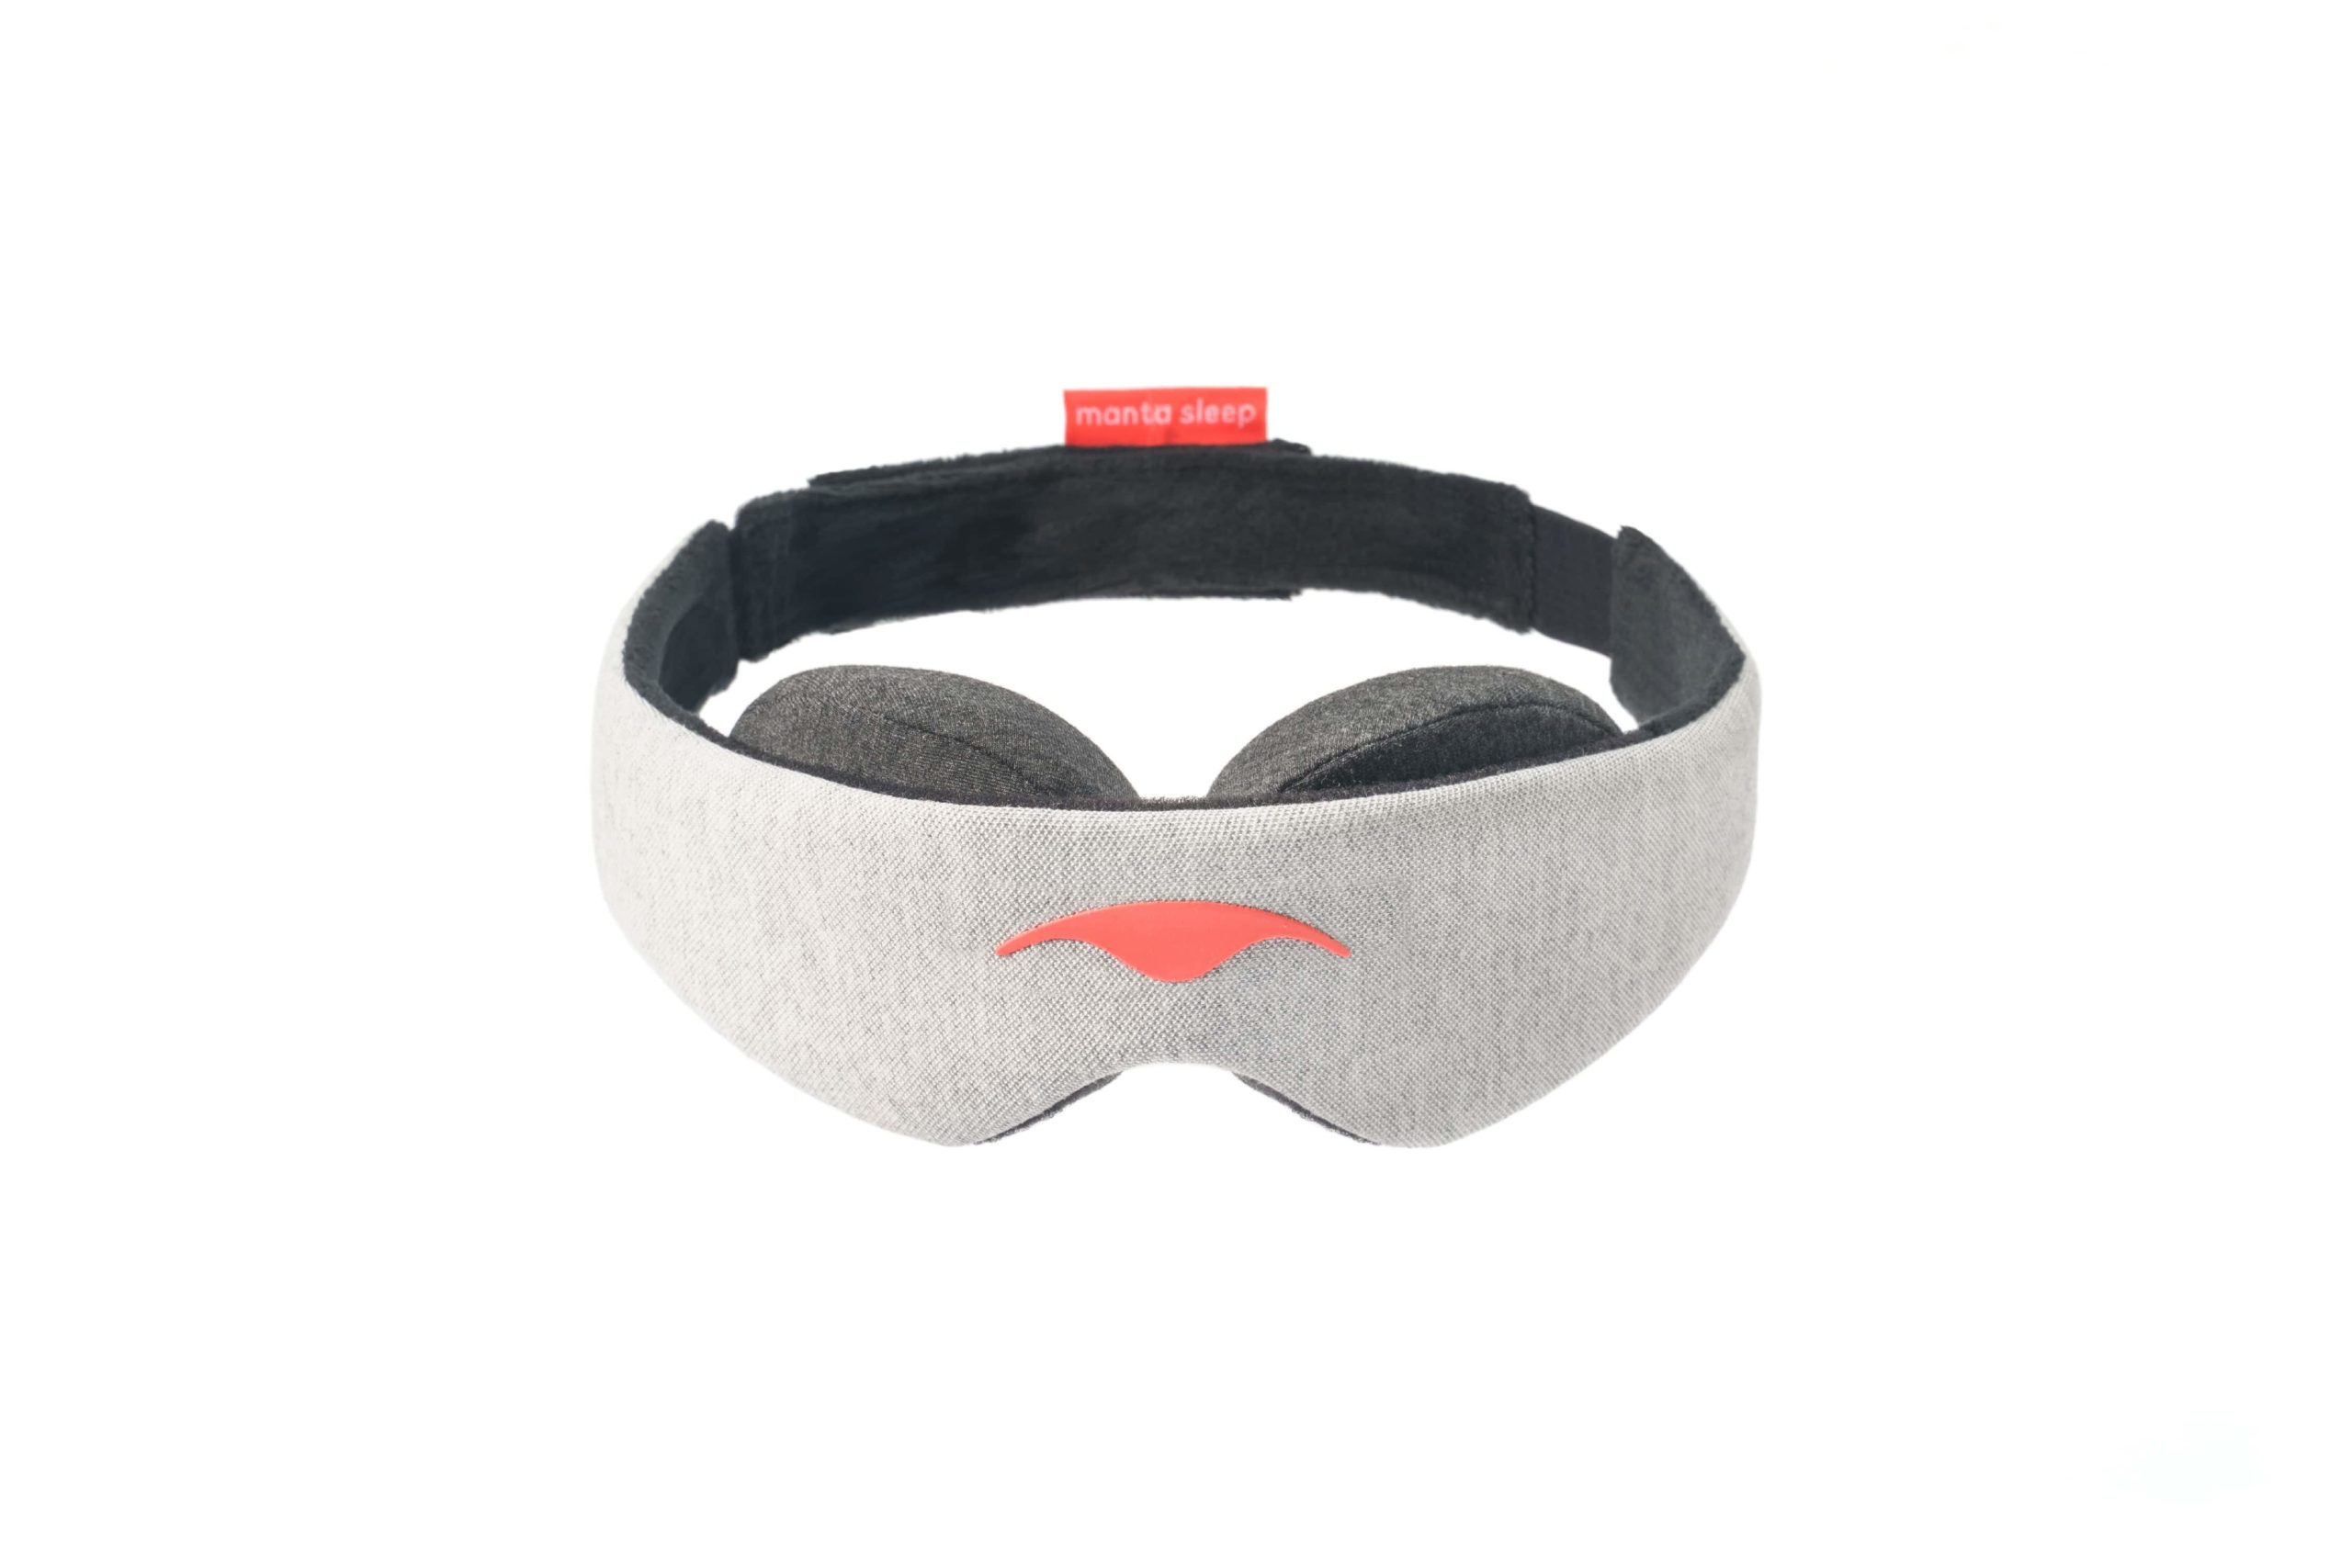 Manta Sleep Mask with adjustable eye cups for 100% darkness